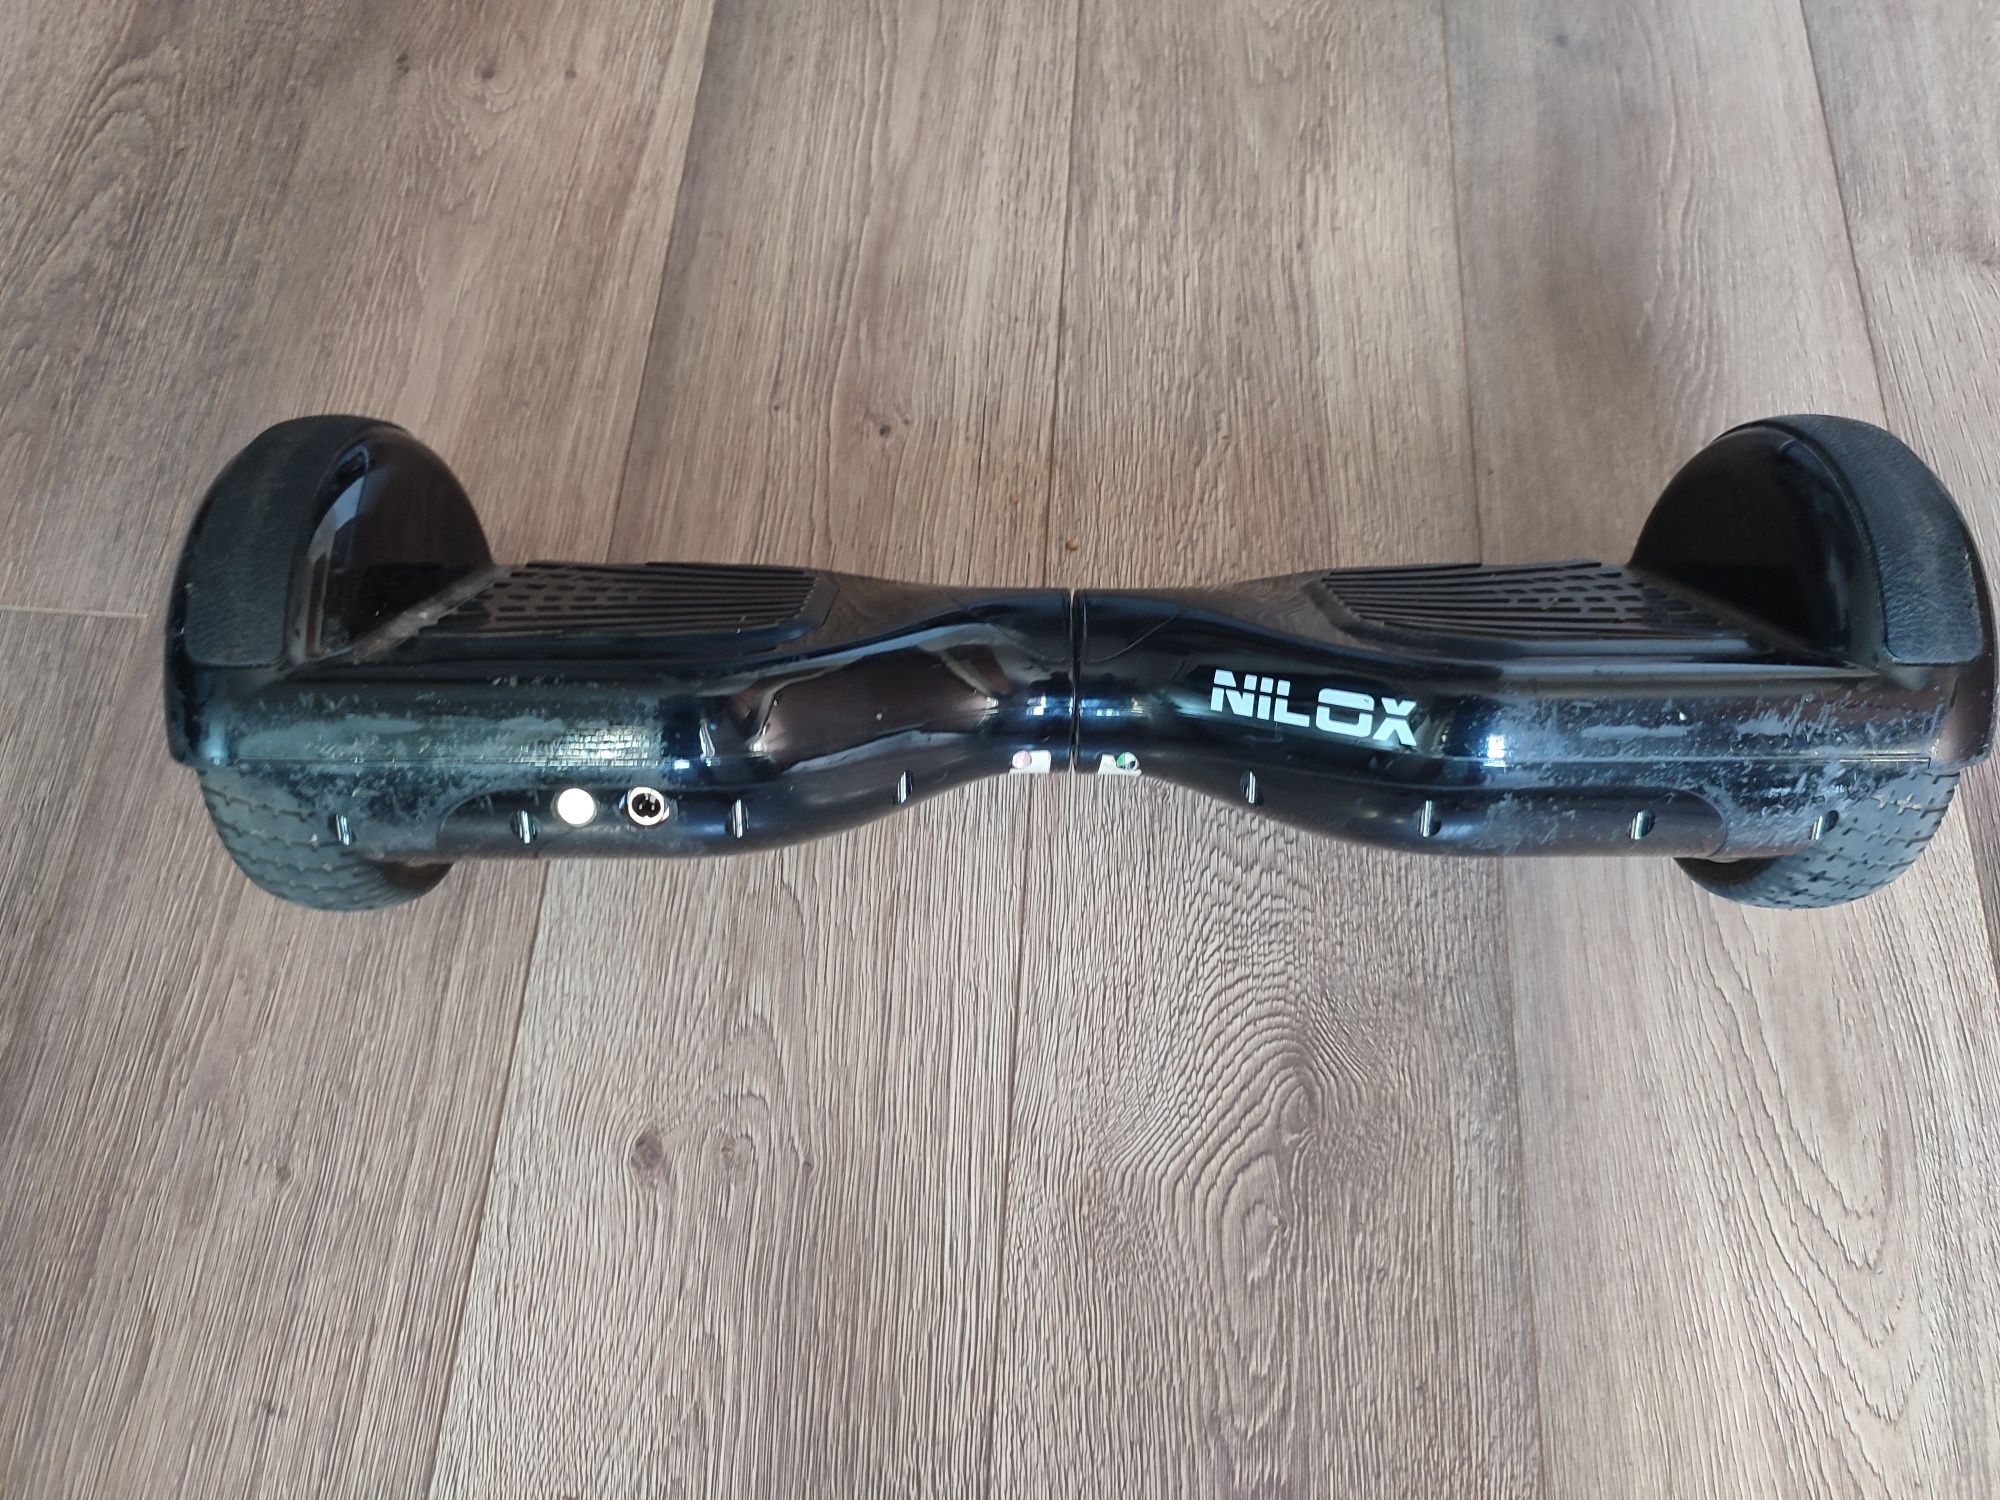 Nilox hoverboard